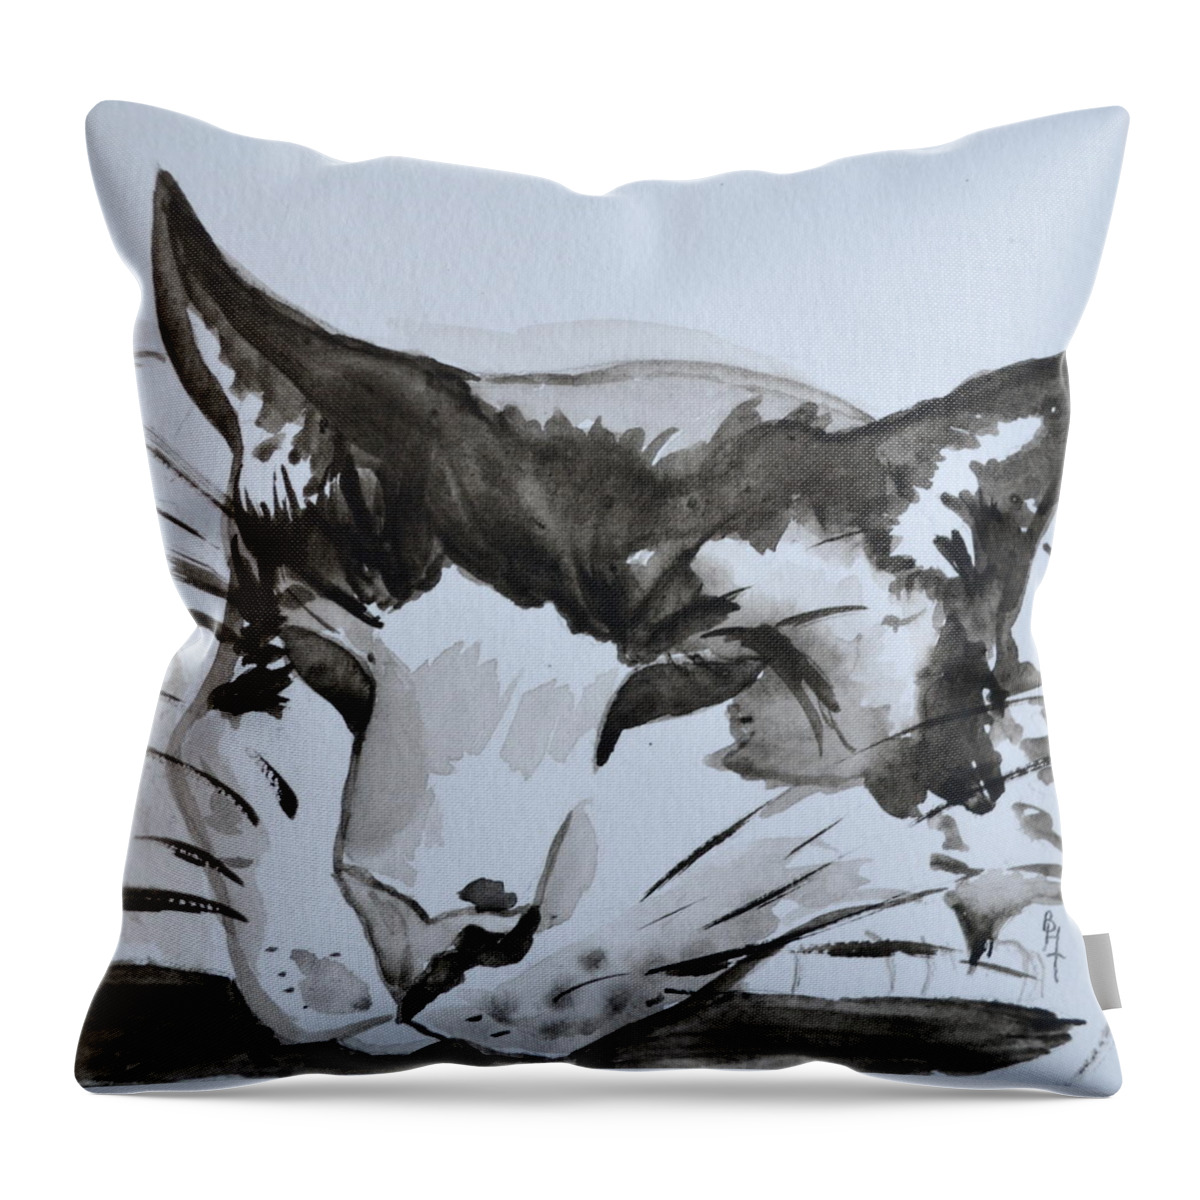 Feline Throw Pillow featuring the painting Feline by Beverley Harper Tinsley